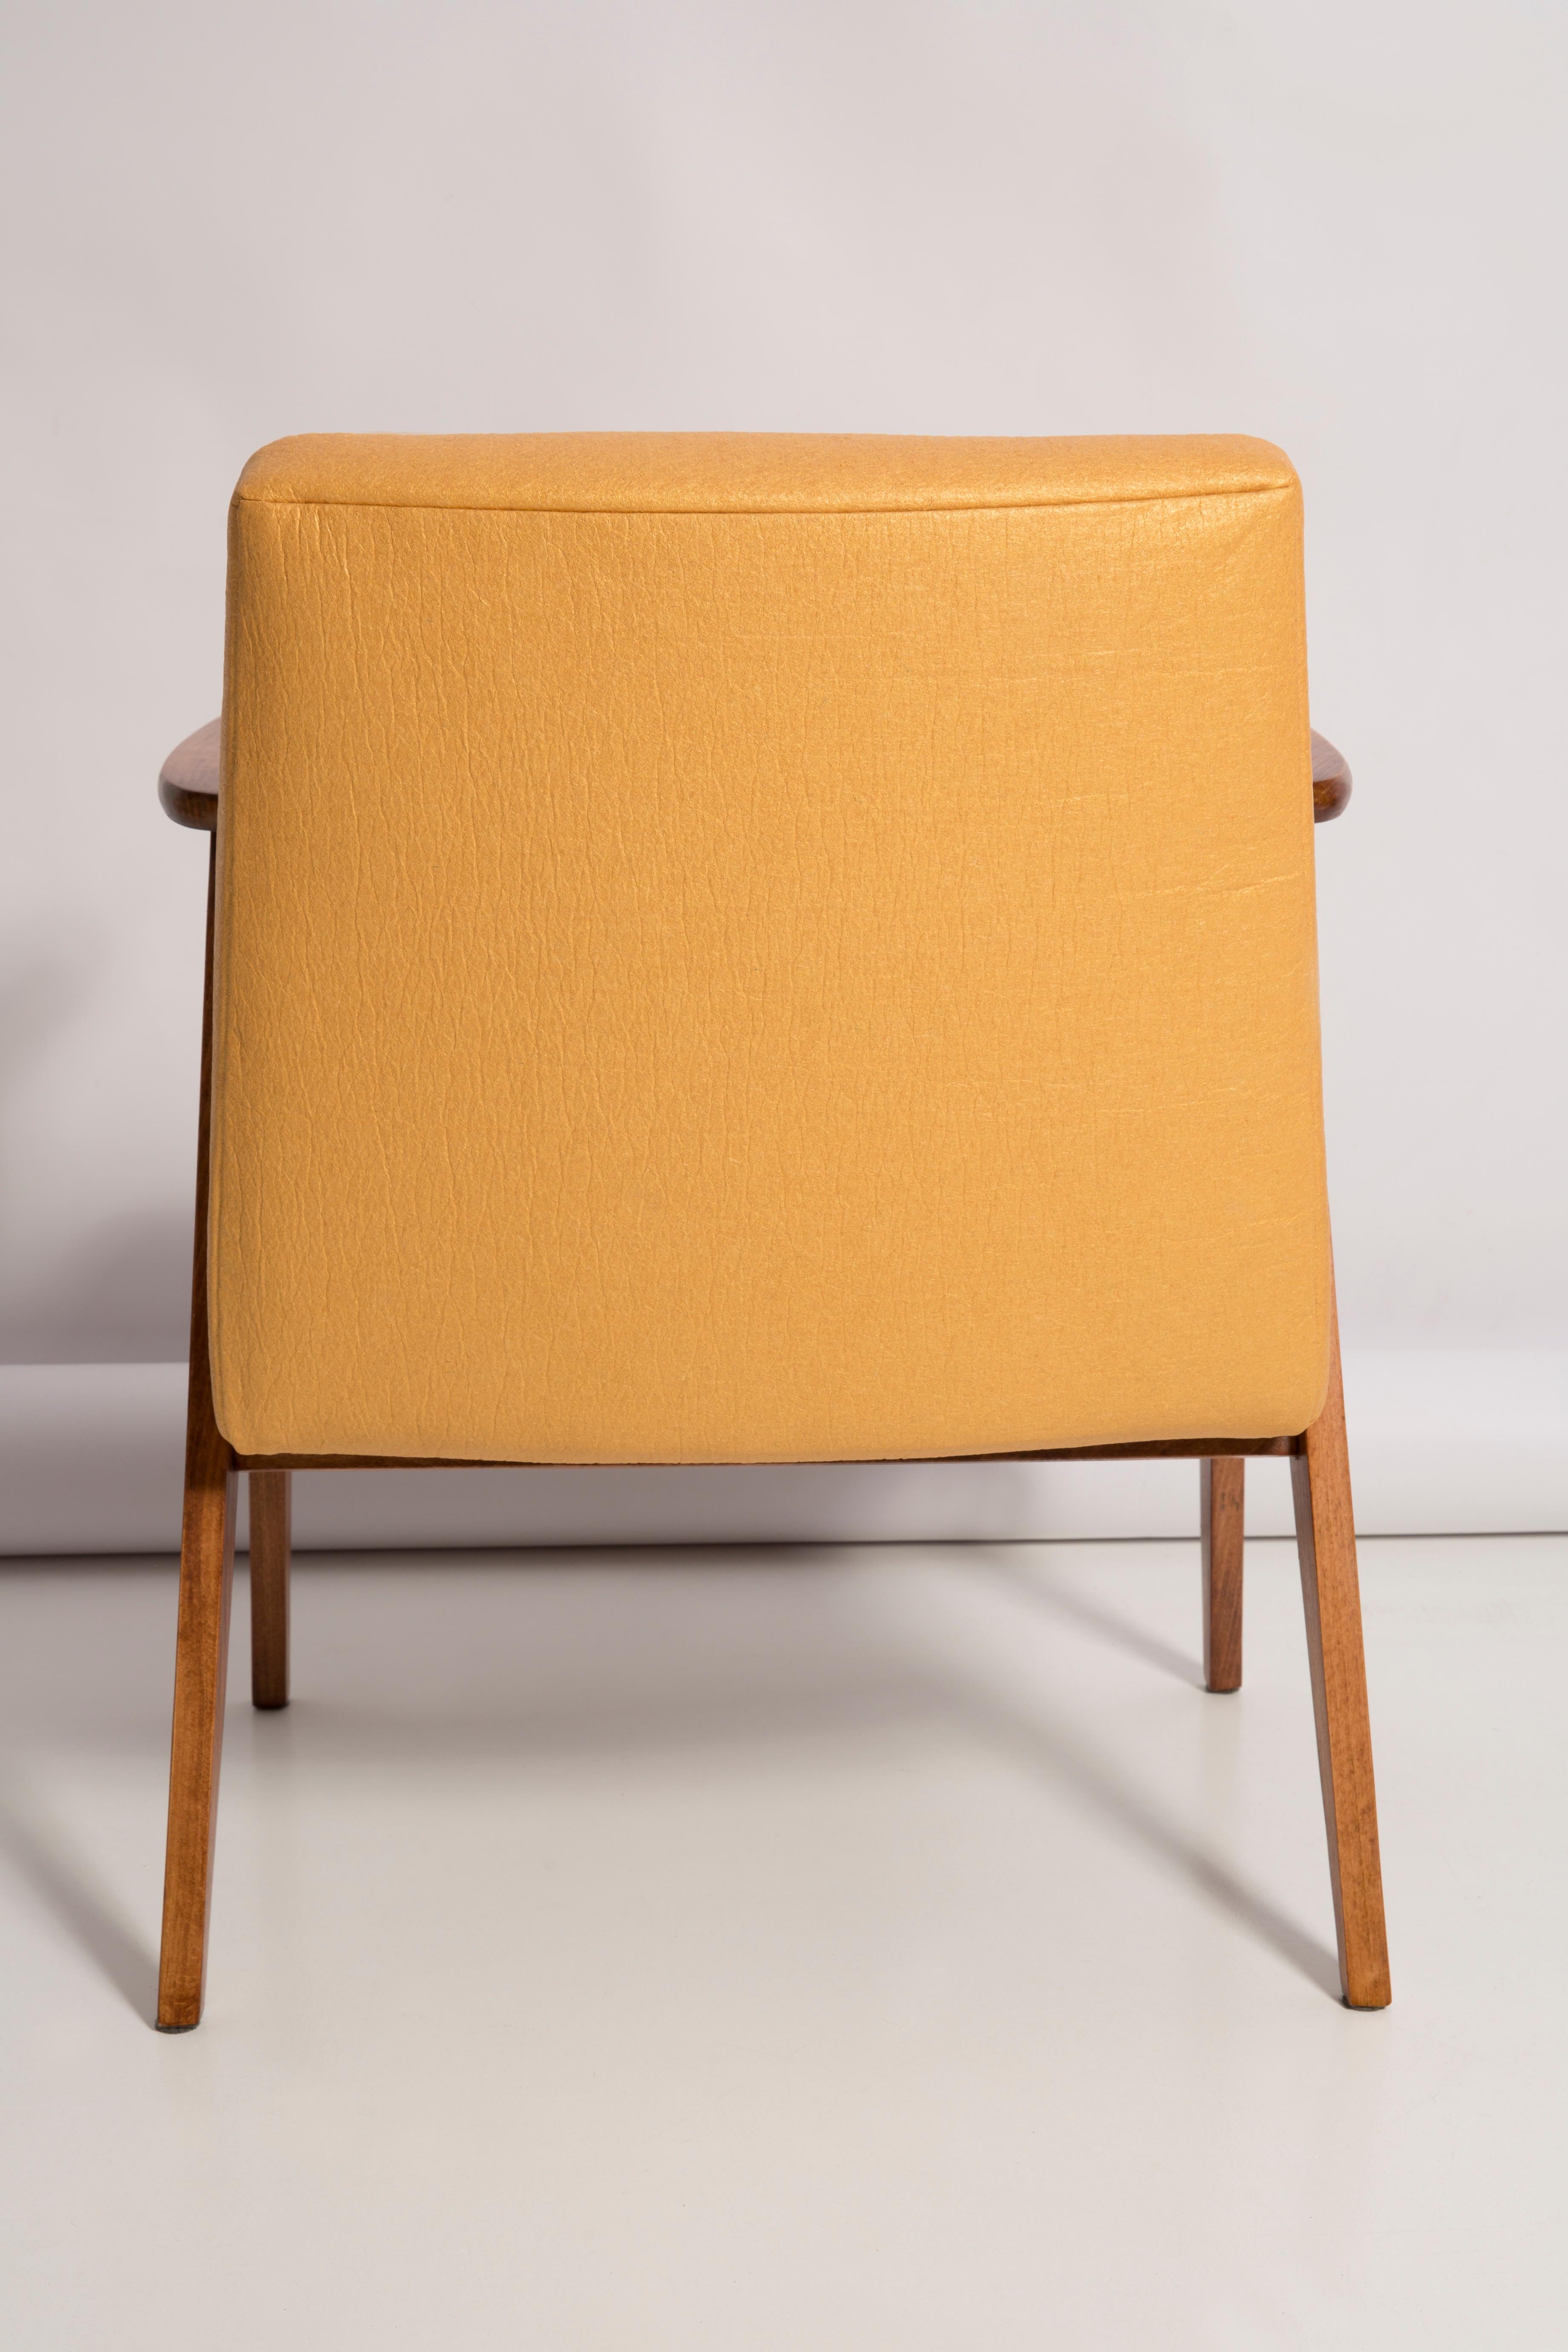 Midcentury 366 Club Armchair in Gold Pineapple Leather, Jozef Chierowski, 1960s For Sale 9